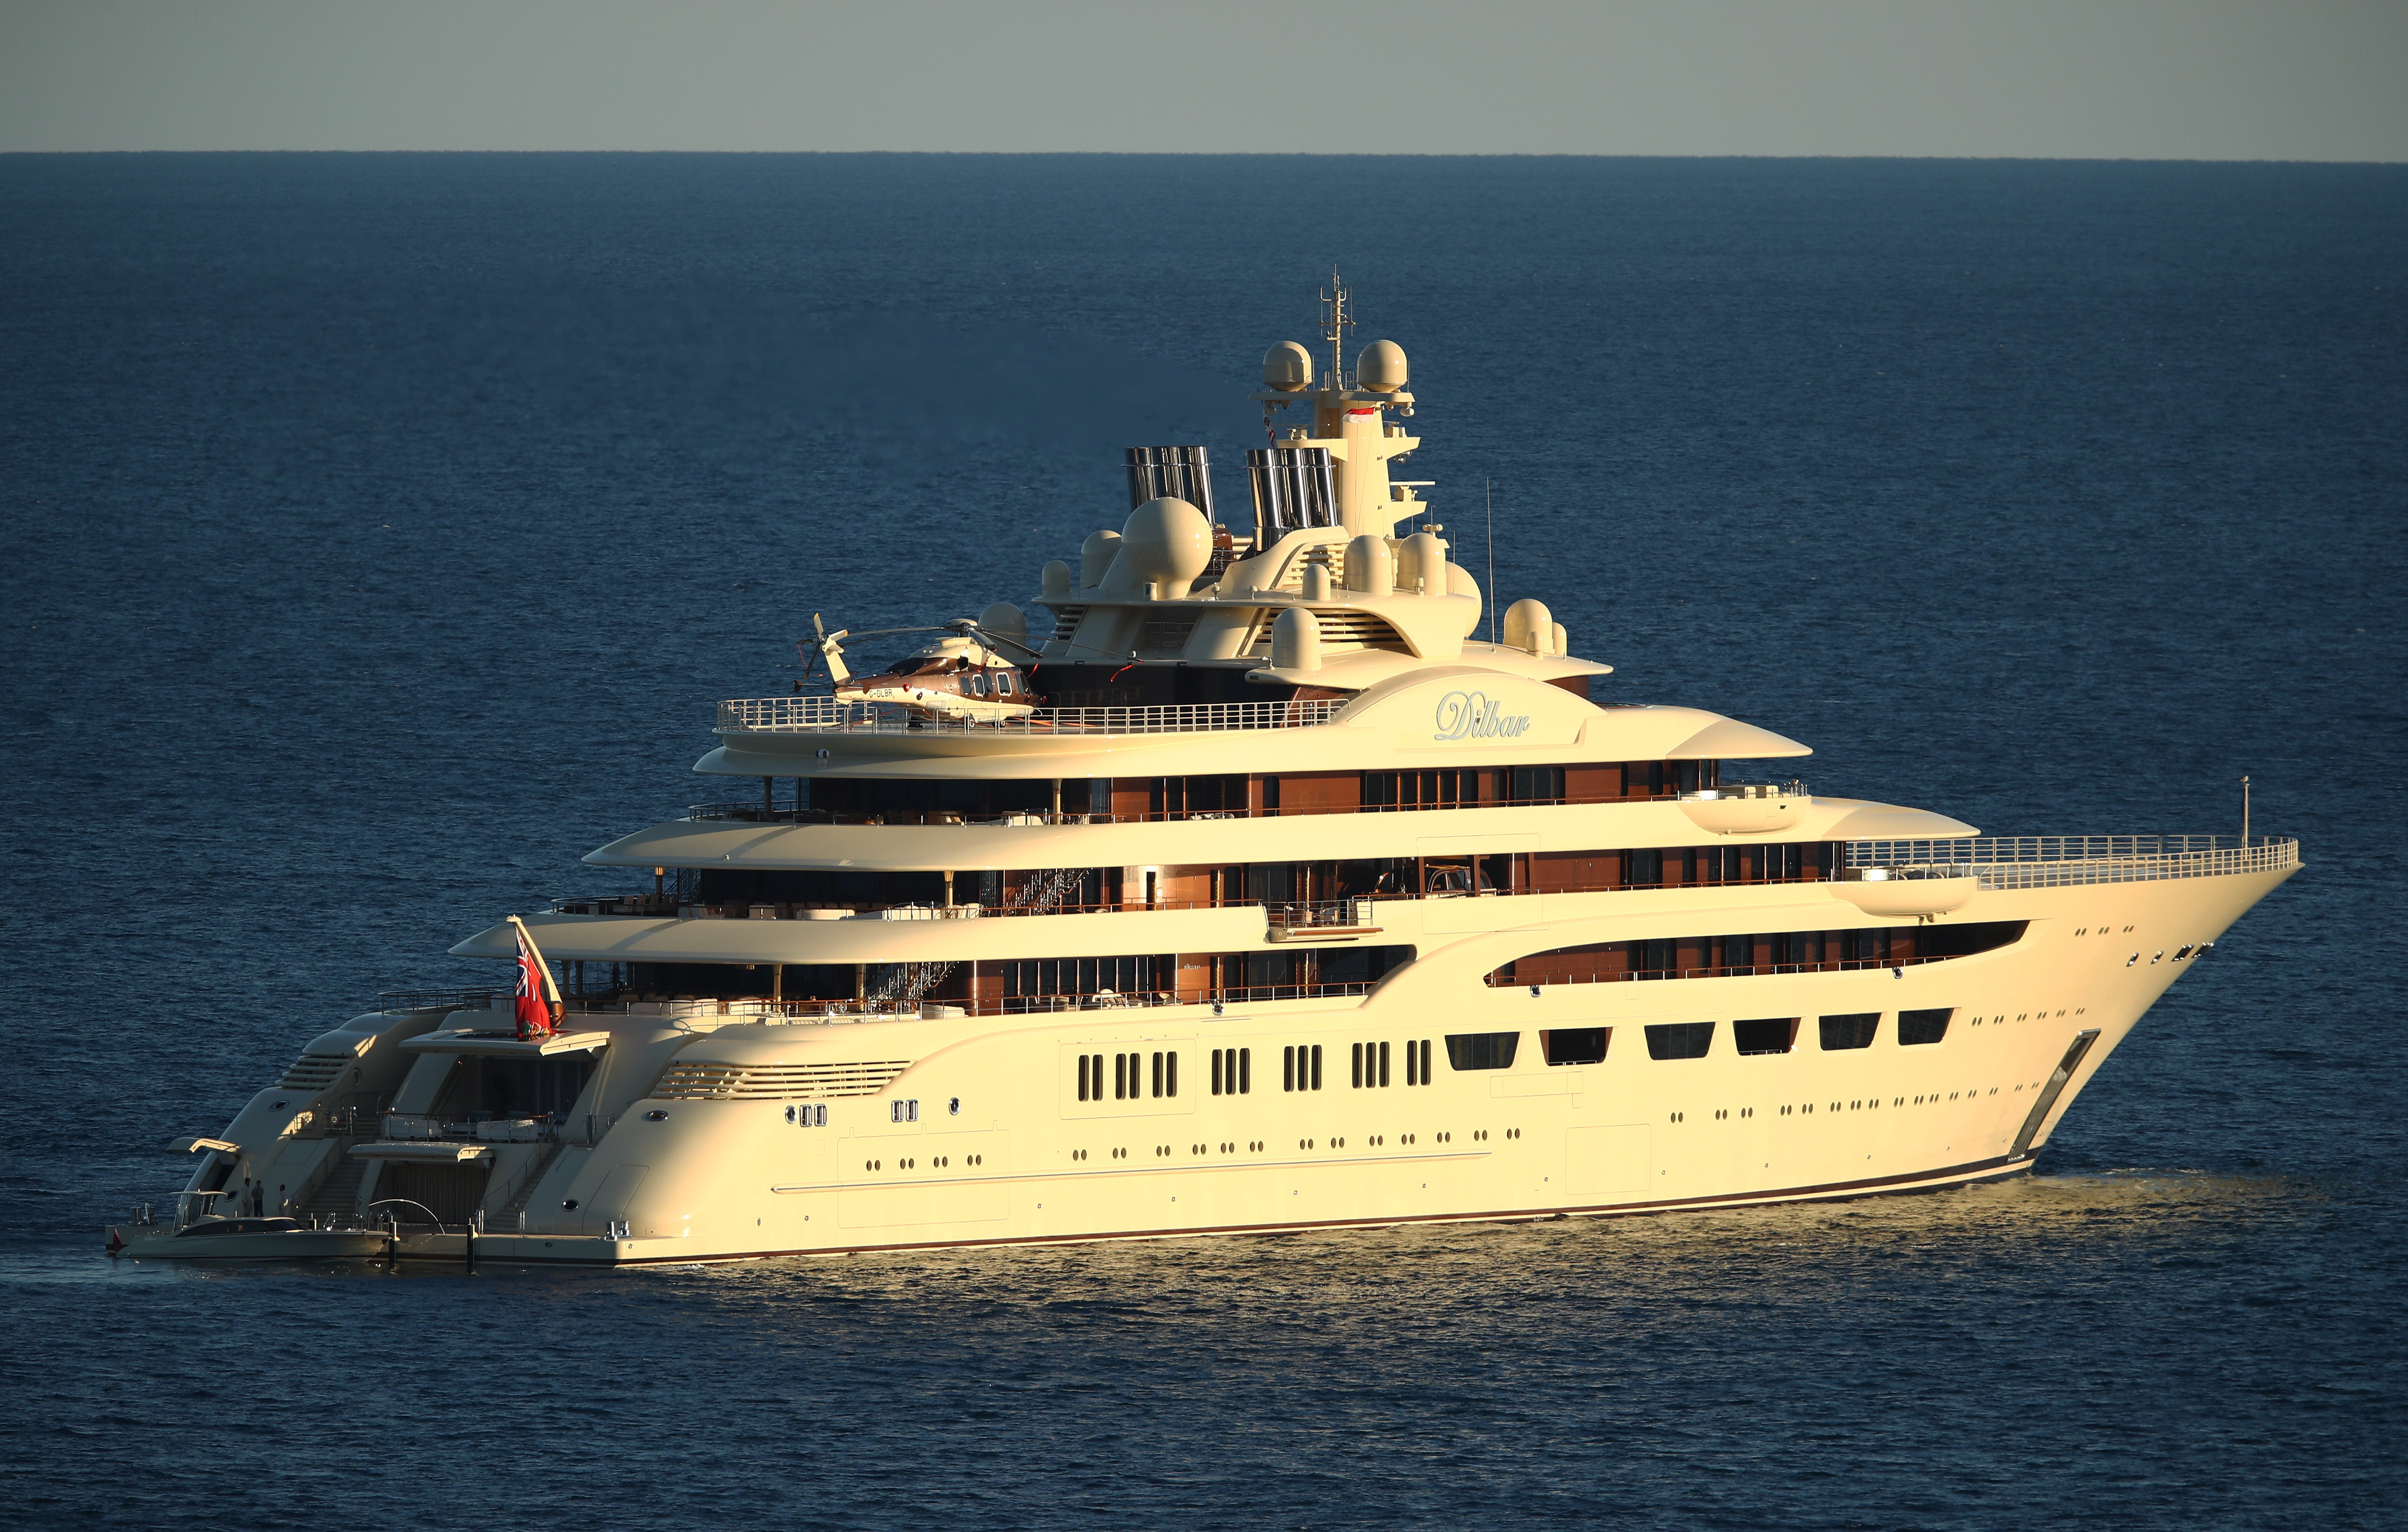 The world’s largest superyacht, Dilbar, was seized by Hamburg port authorities this week